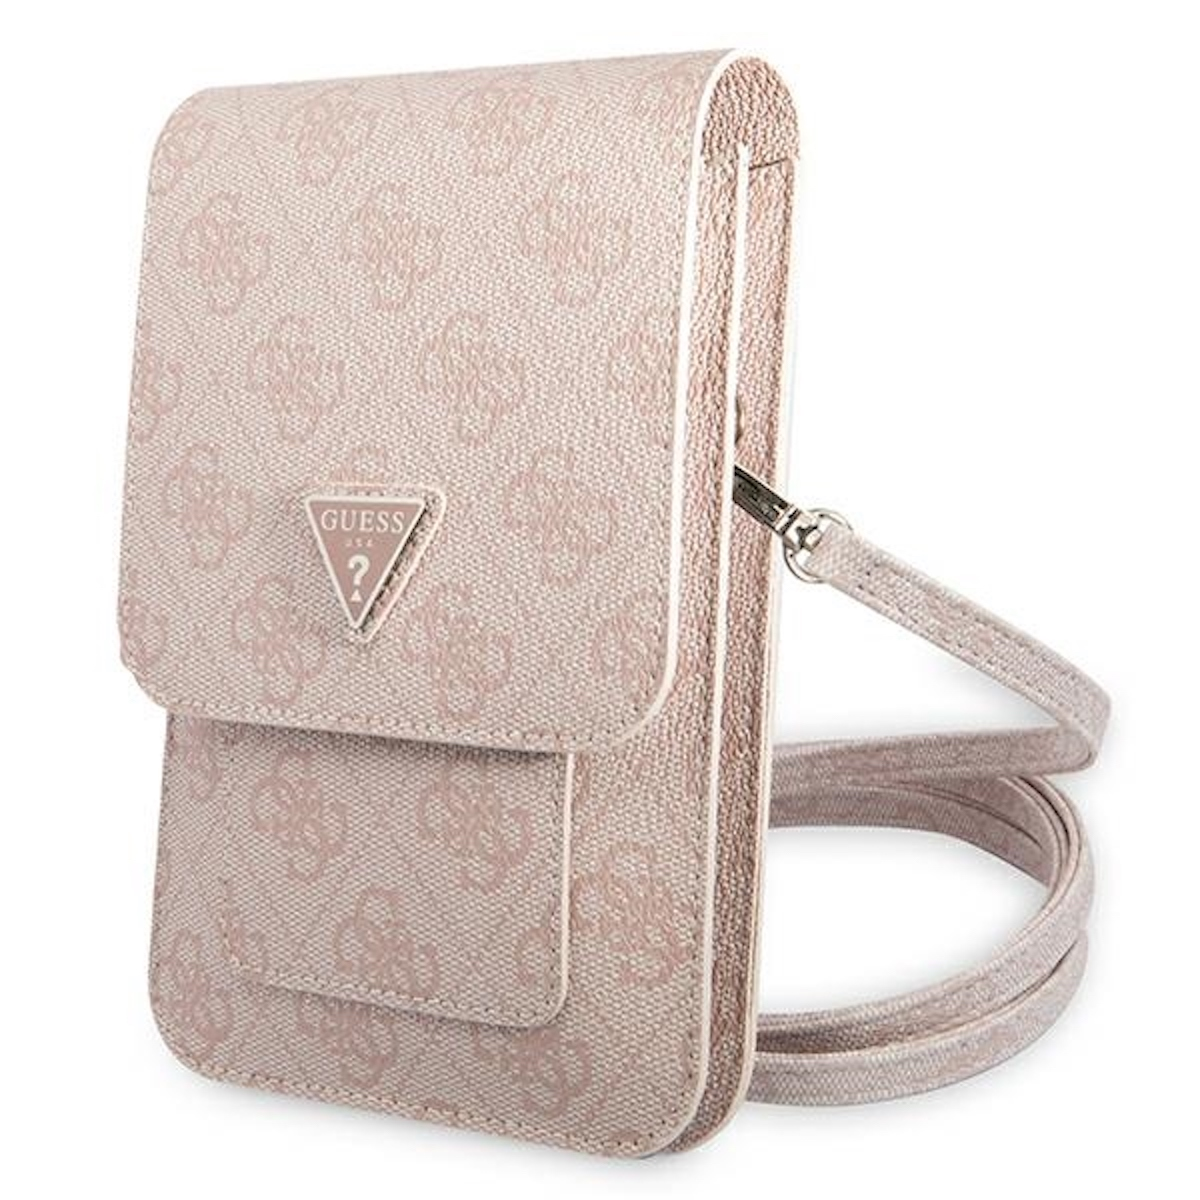 GUESS Torebka Triangle Umhängetasche, Tasche, Rosa Universell, Full Cover, Universelle